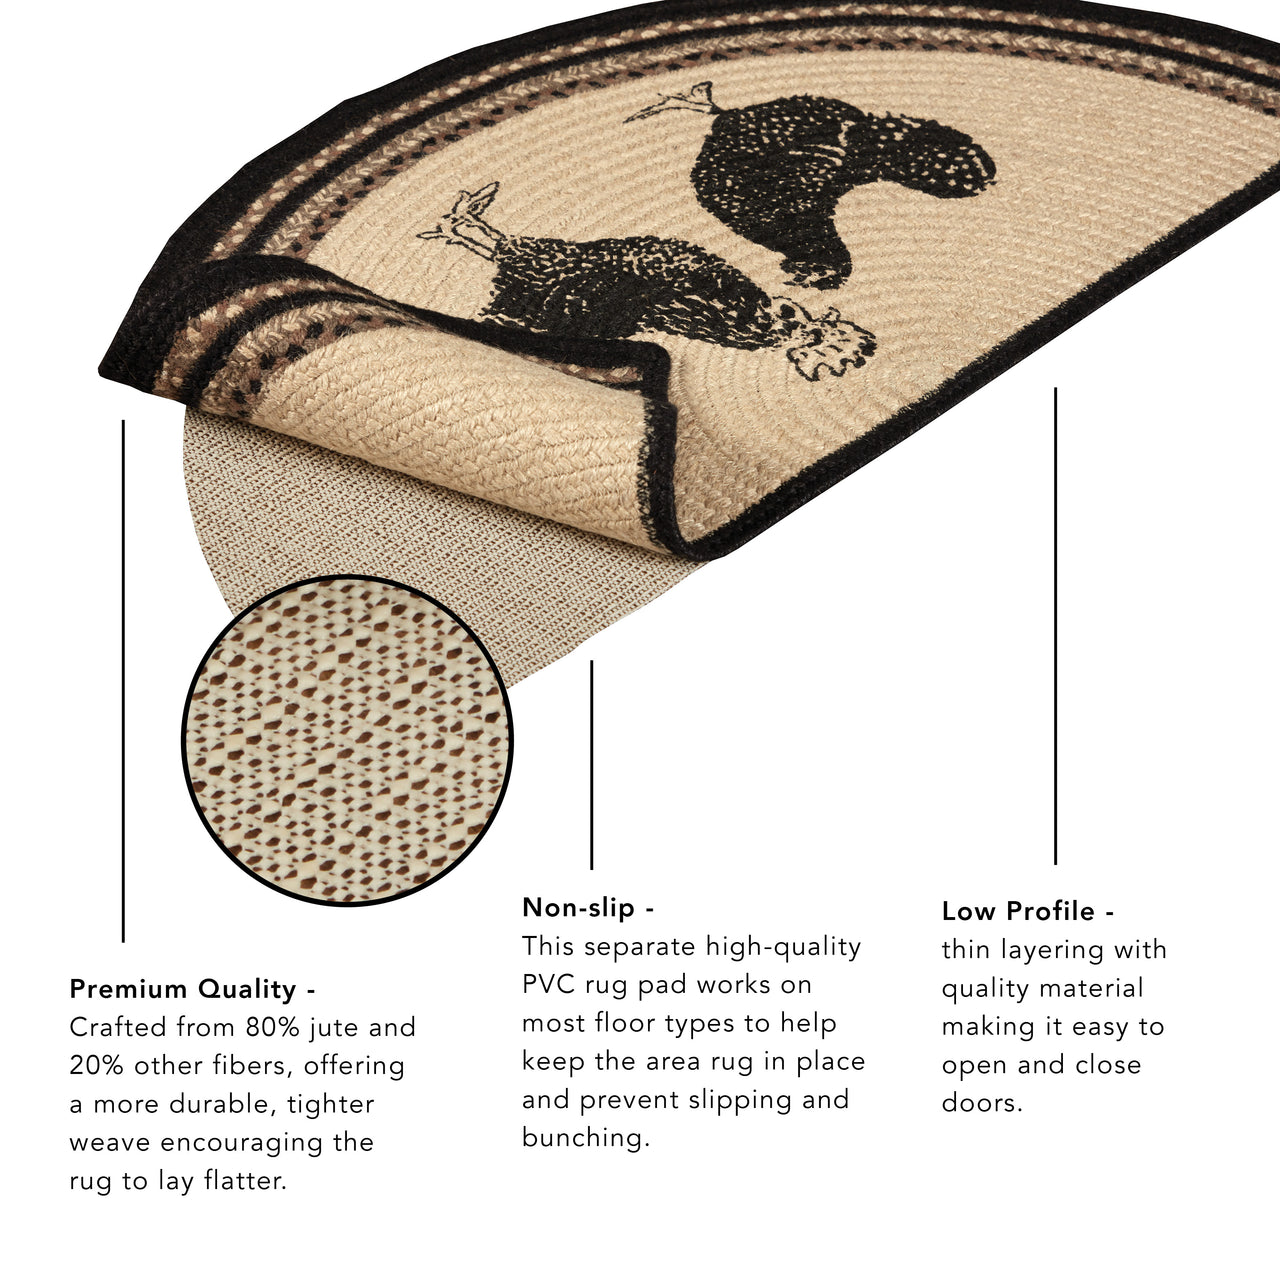 Sawyer Mill Charcoal Poultry Jute Braided Rug Half Circle 16.5"x33" with Rug Pad VHC Brands